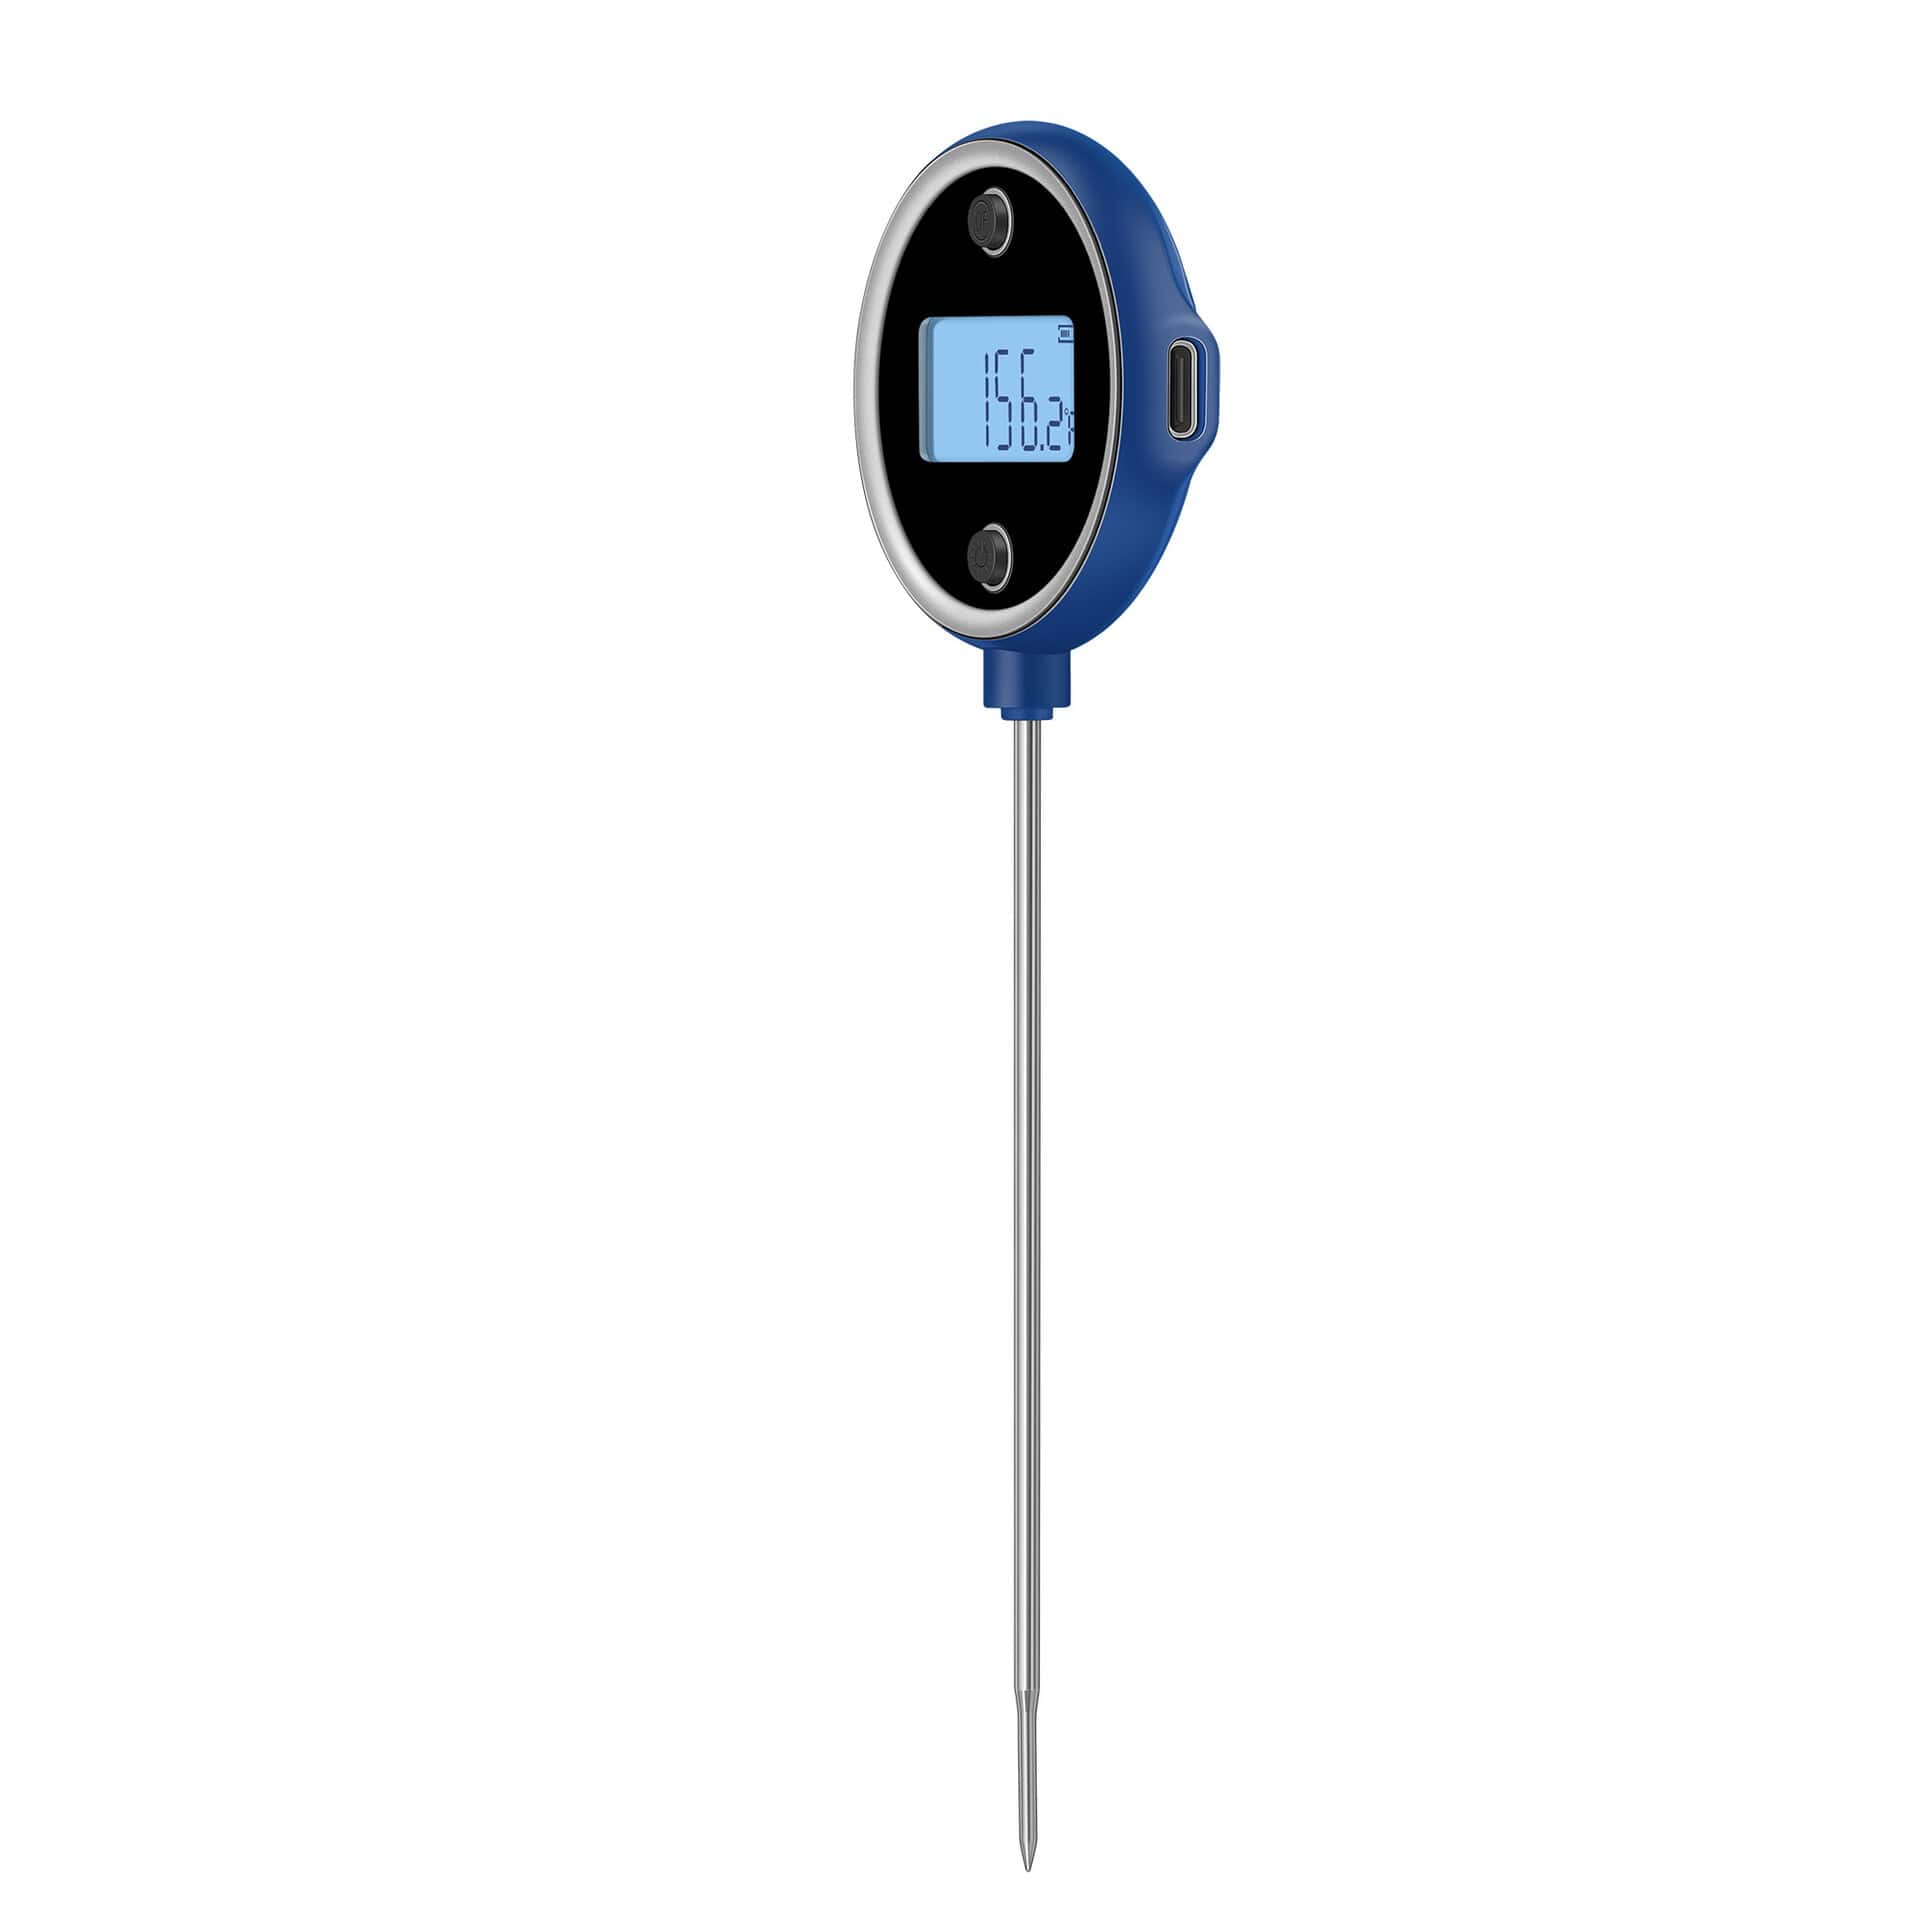 ChefsTemp Pocket Pro Instant Read Meat Thermometer for Grilling, Food, BBQ,  Kitchen Cooking, Oil Deep Frying & Candy (Nobility Blue) 